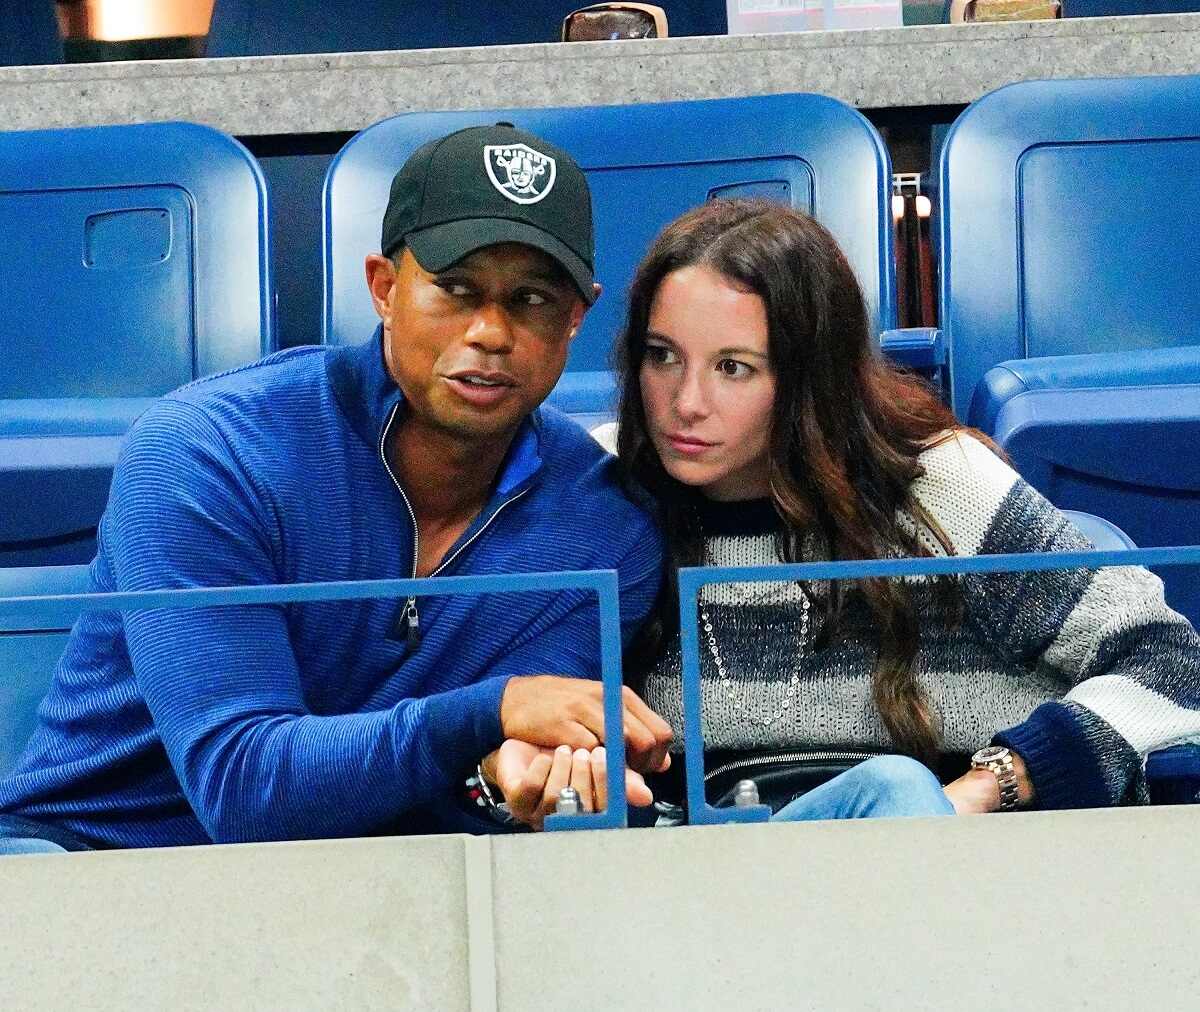 Tiger Woods and Erica Herman are seen deep in conversation during the 2019 US Ooepn Tennis Championship. Herman was Tiger Wood's girlfriend until recently.